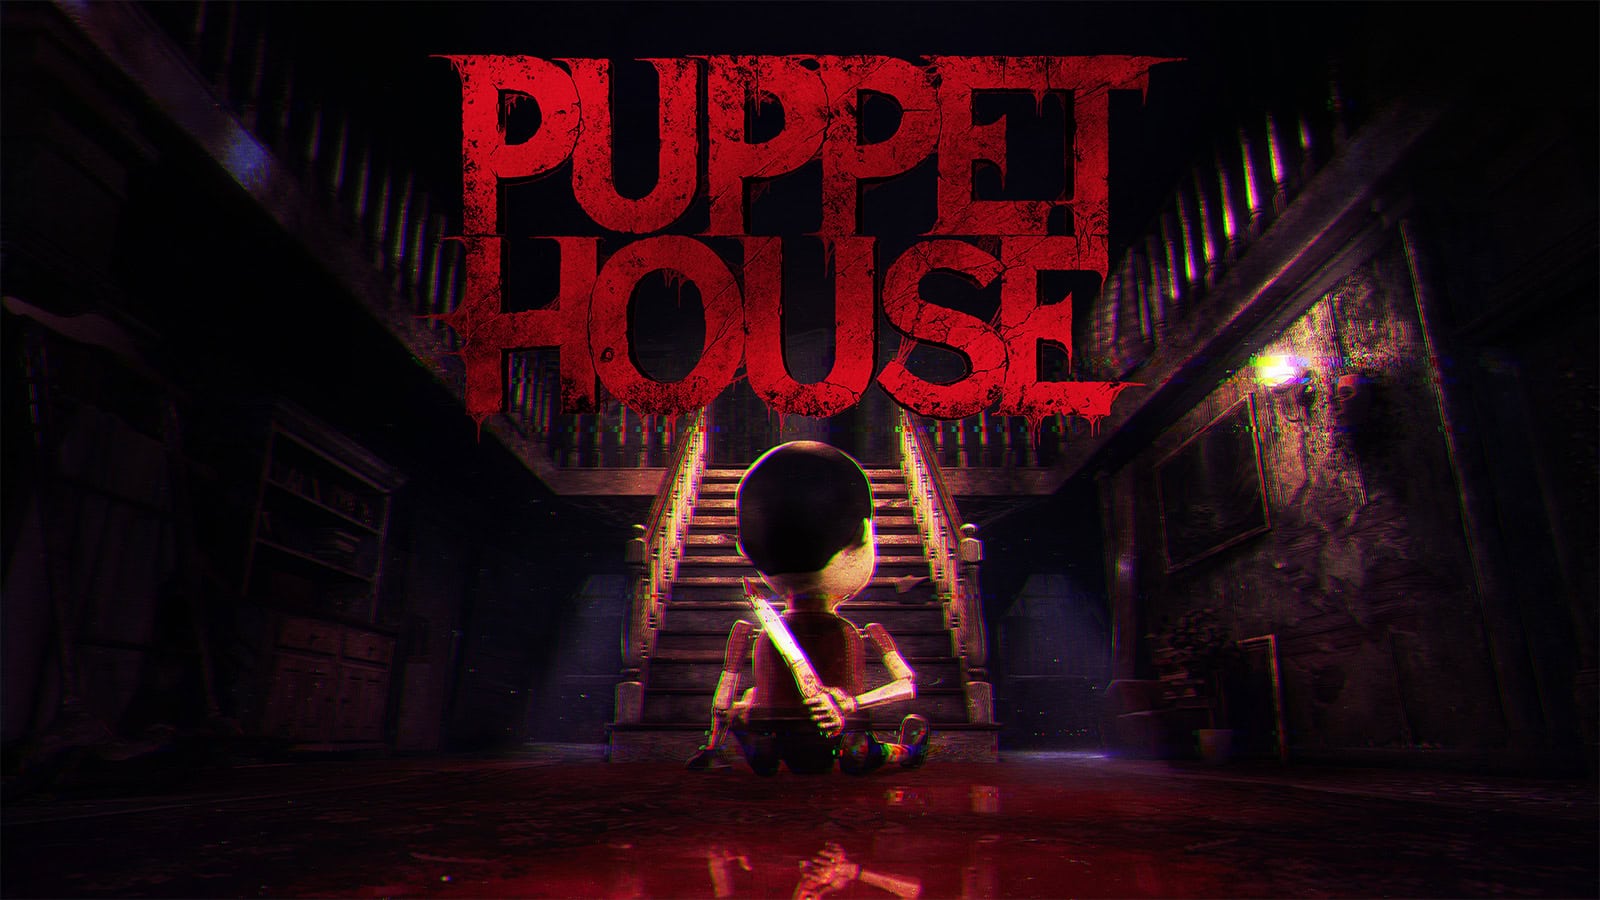 Face a murderous puppet in upcoming horror game Puppet House